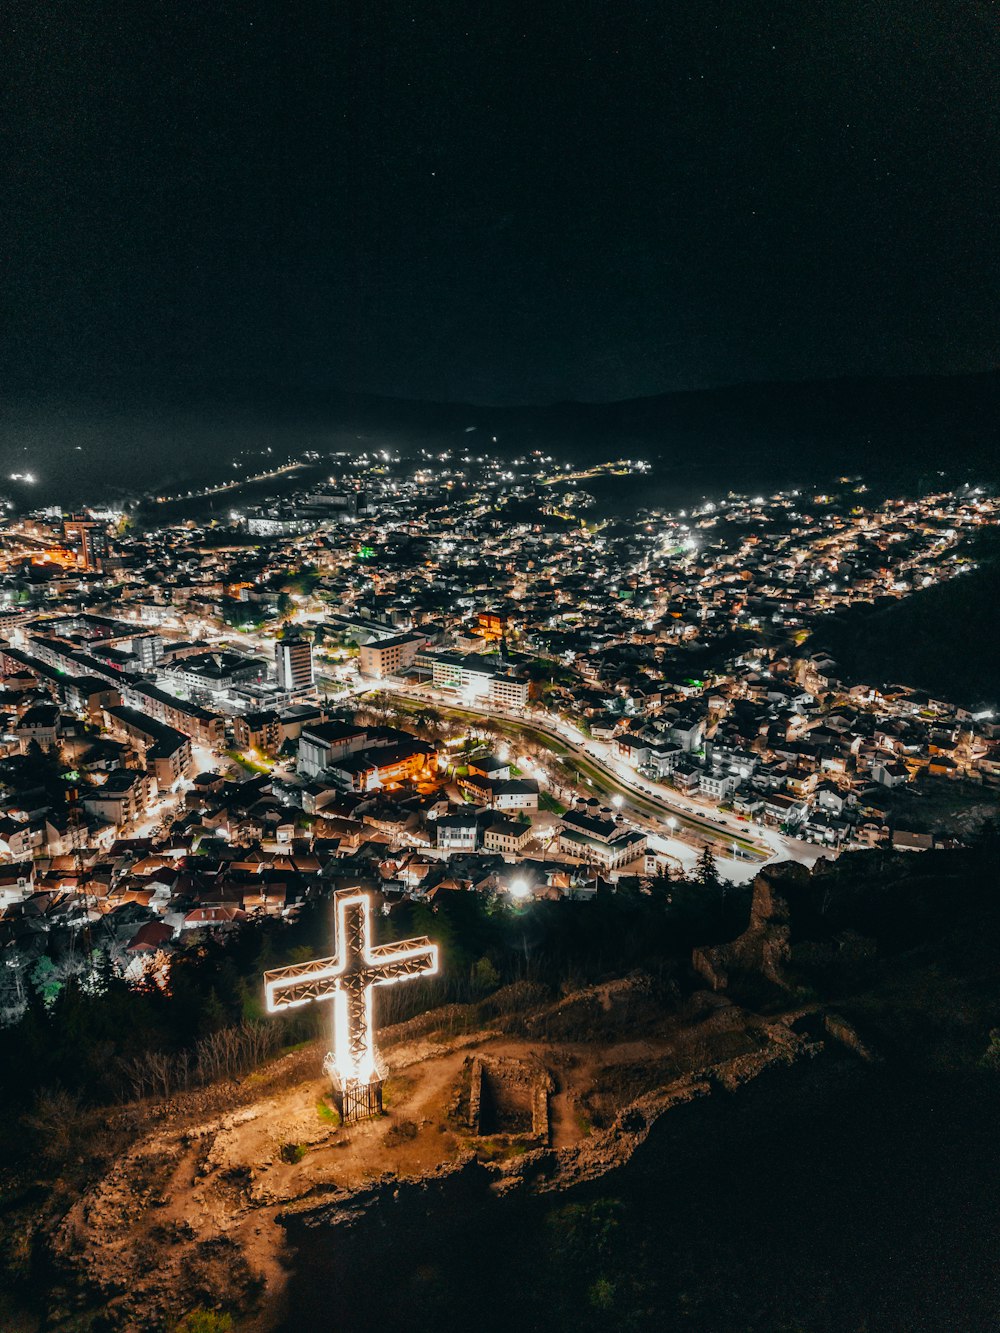 a city at night with a lighted cross in the foreground